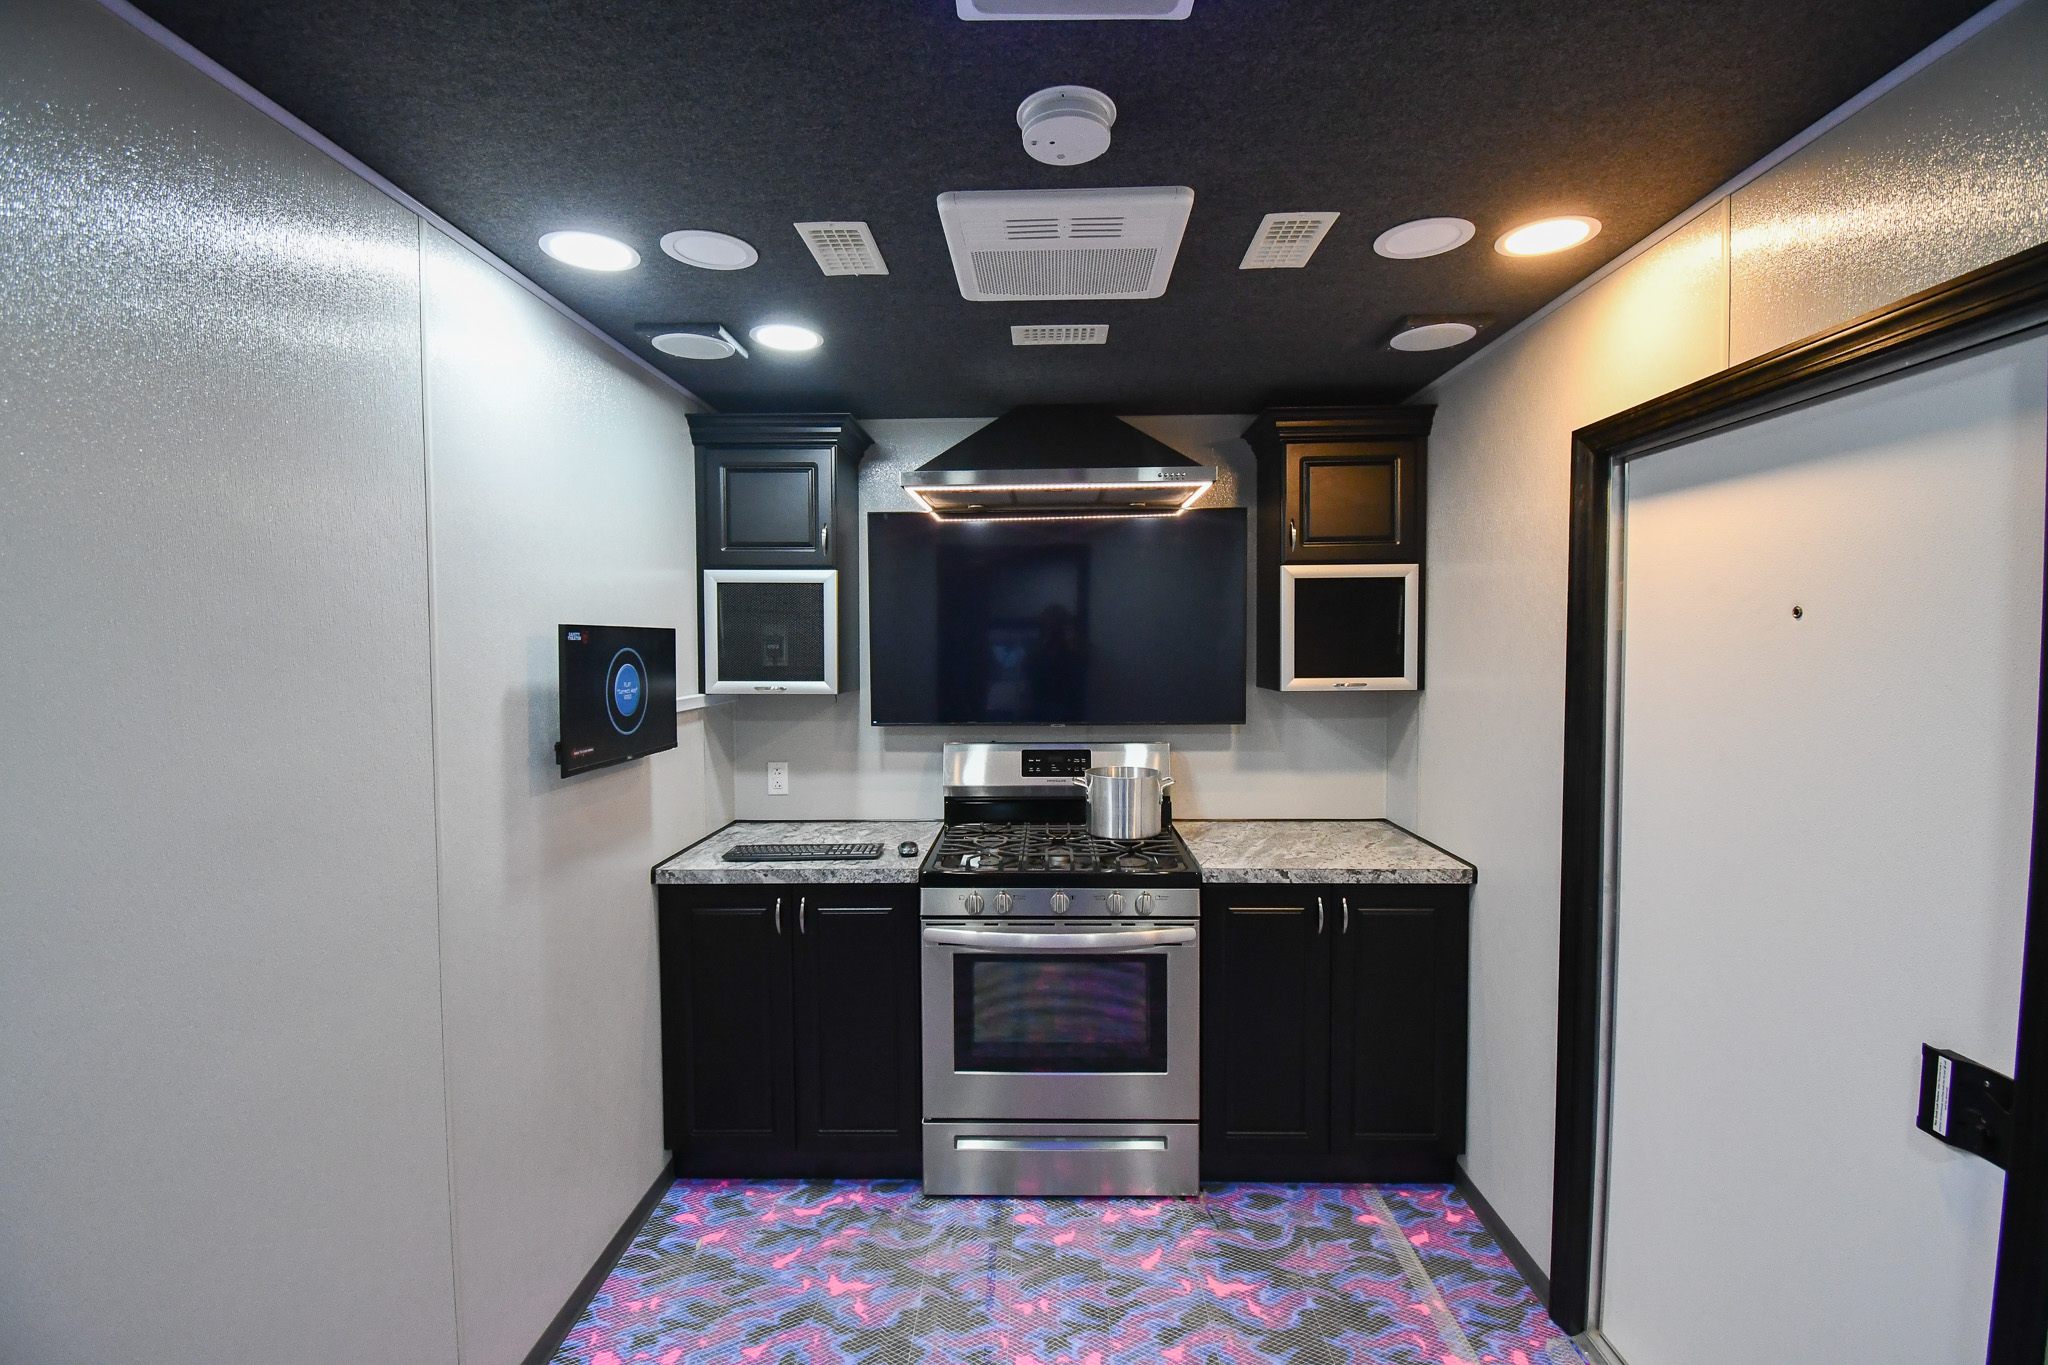 A view of the kitchen stage inside the unit for Merrillville, IN.